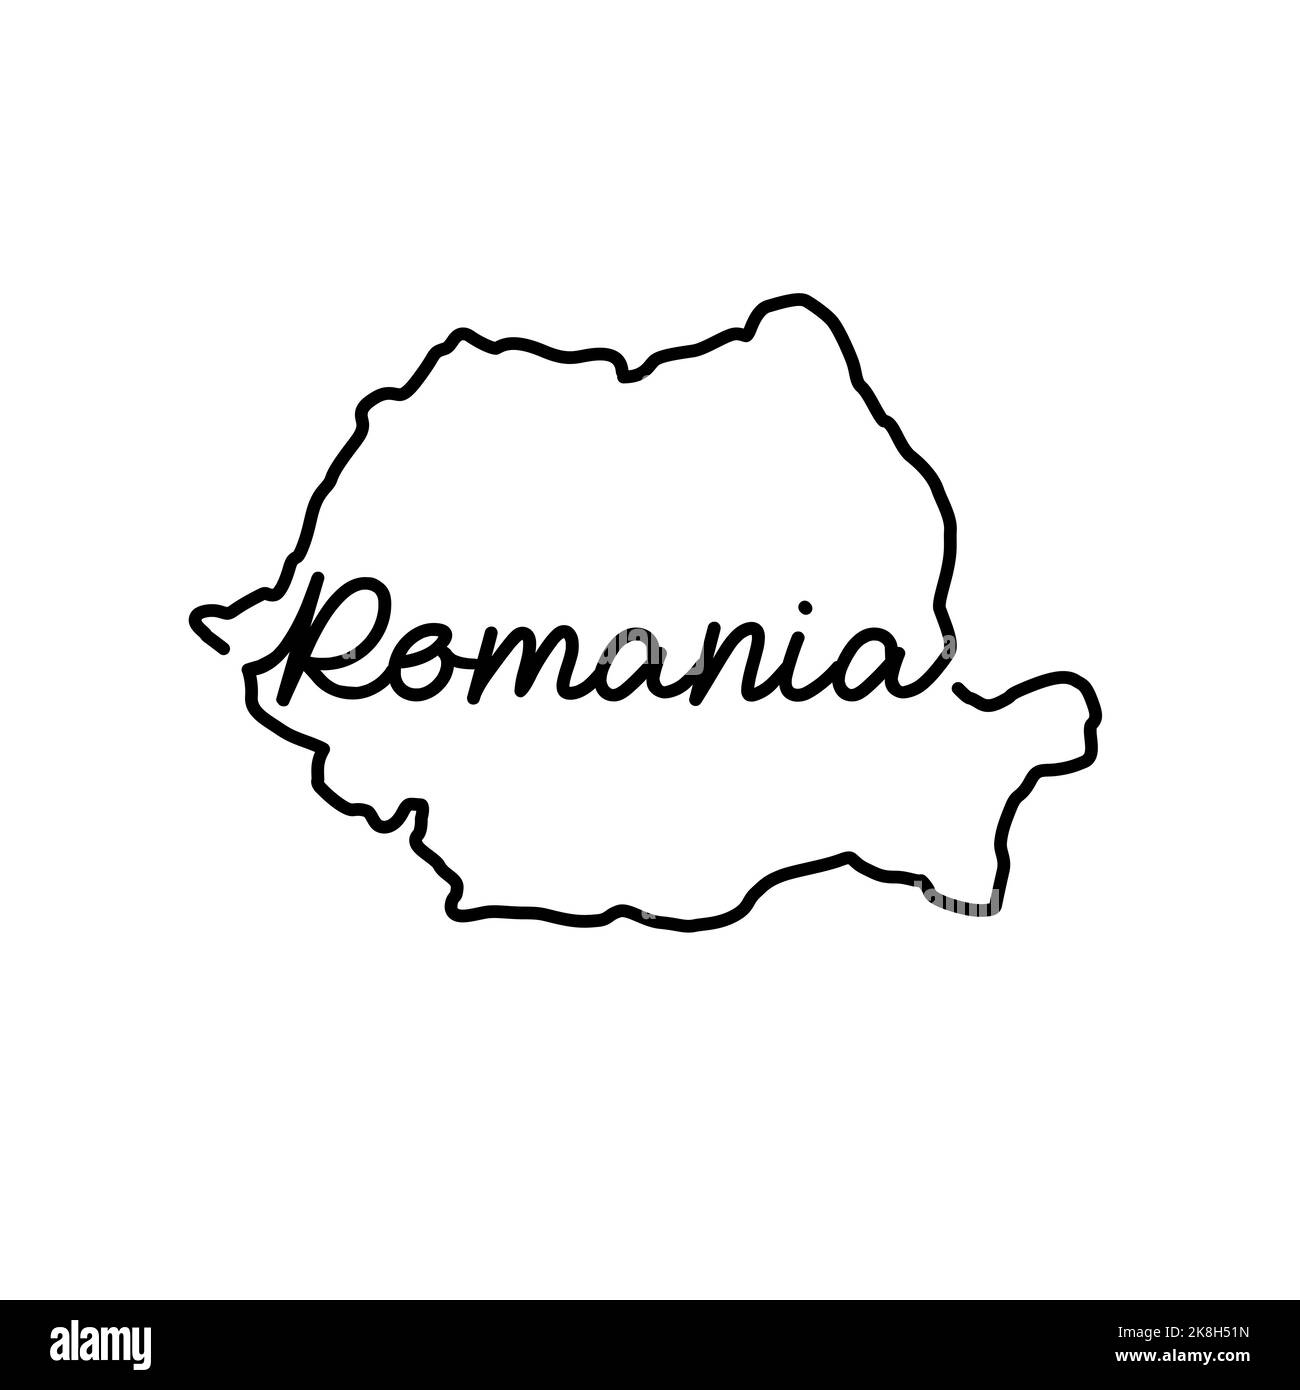 Romania outline map with the handwritten country name. Continuous line drawing of patriotic home sign. A love for a small homeland. T-shirt print idea Stock Photo